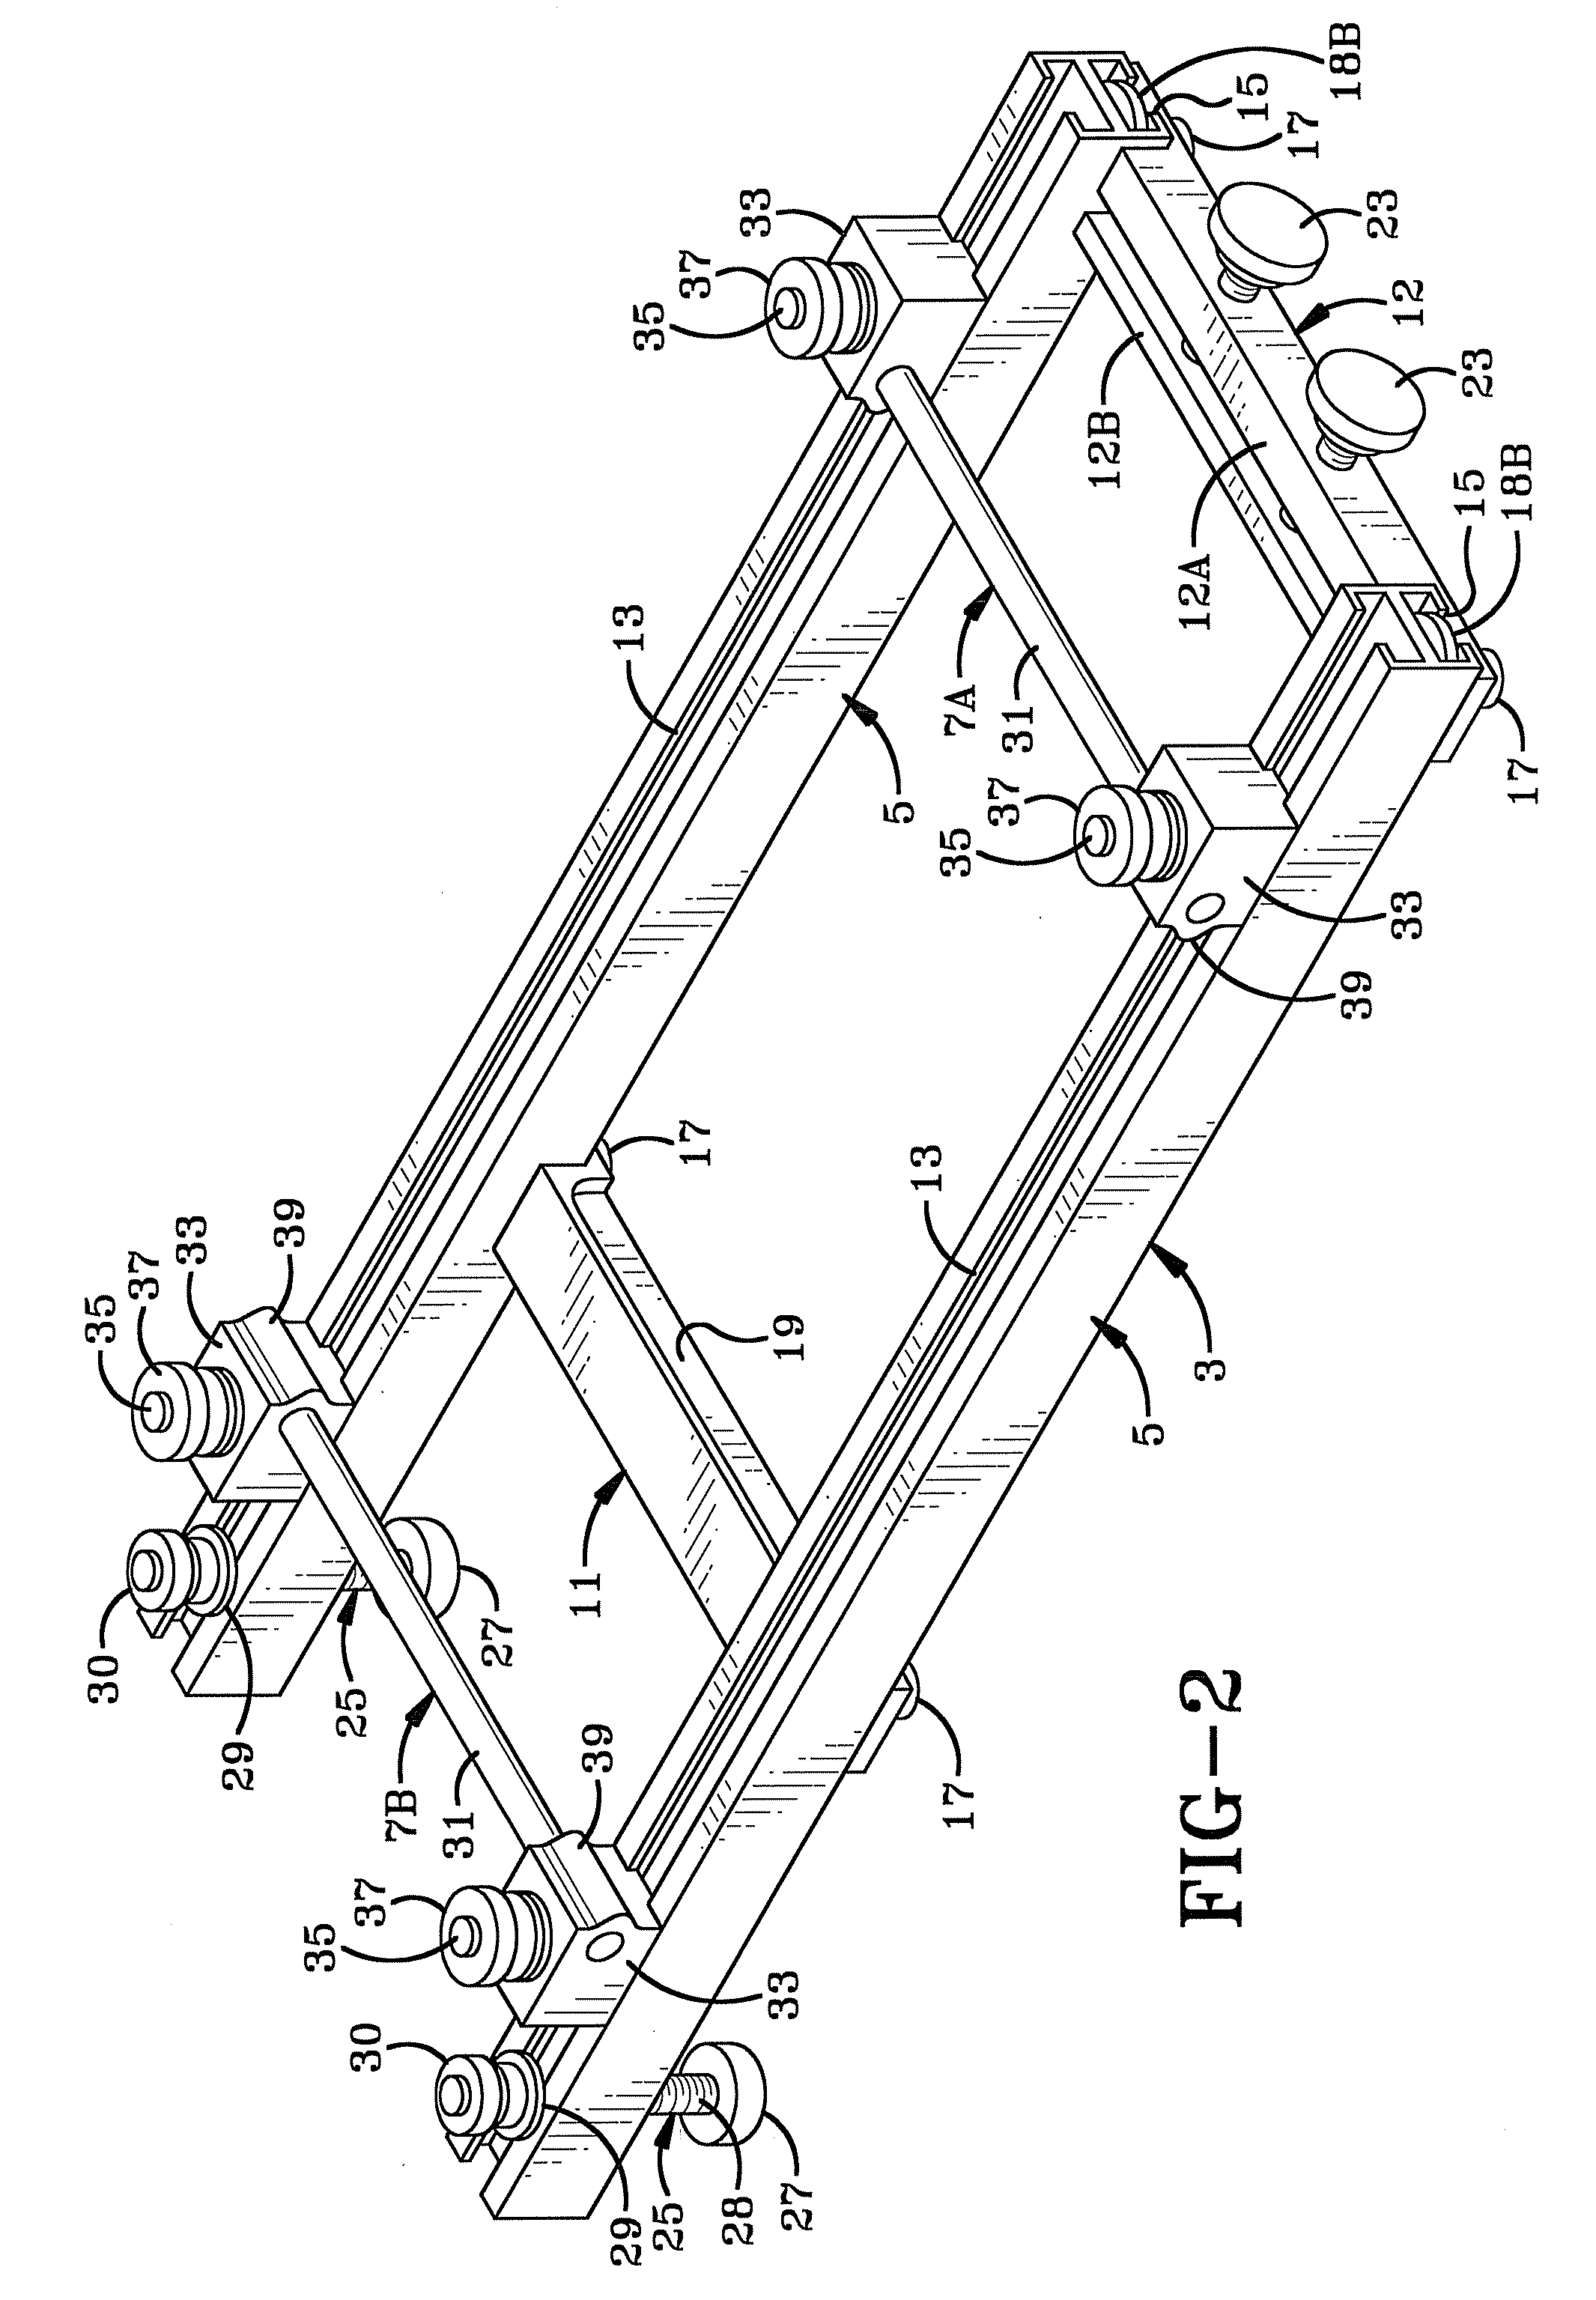 Method and apparatus for sharpening a tool blade